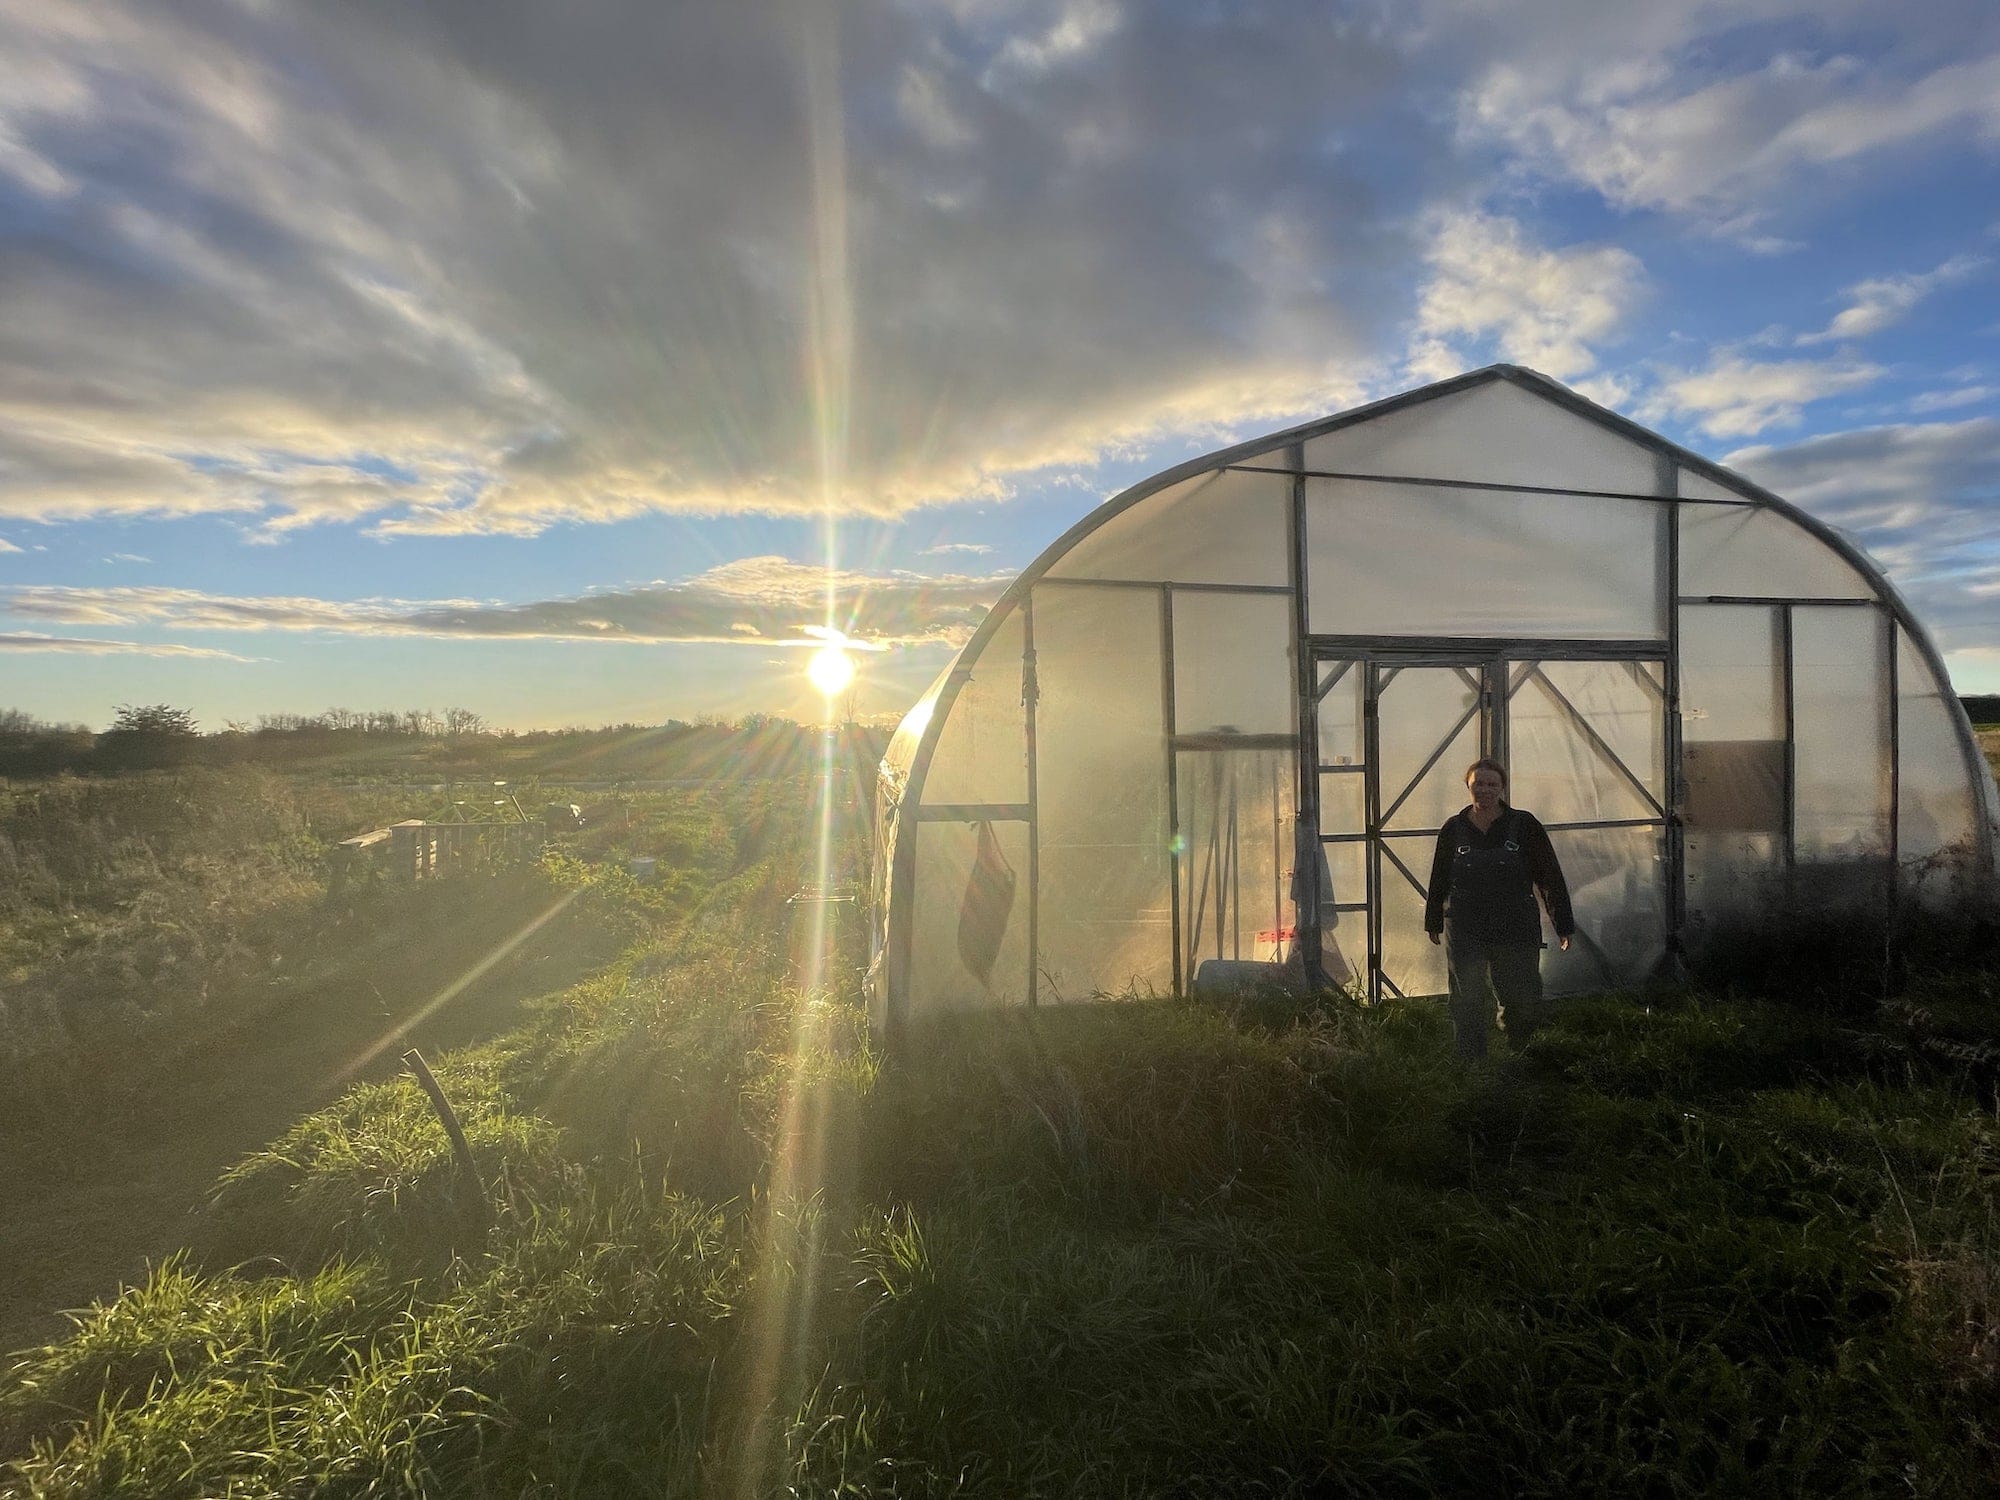 sun behind the greenhouse - Cold Front, Big Parsley